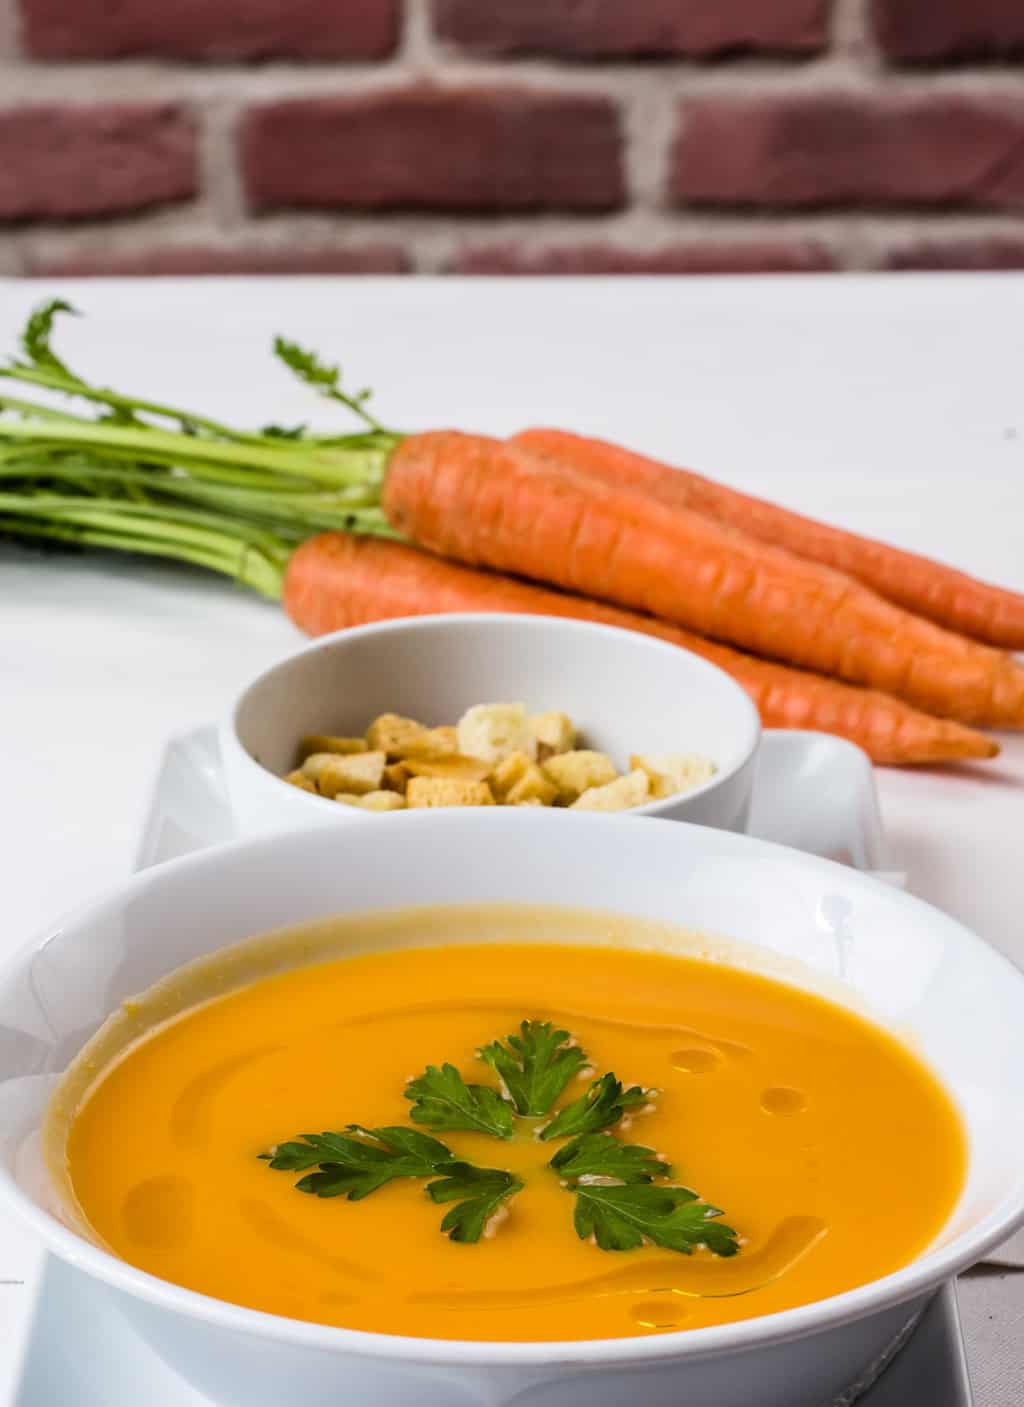 Bowl of soup on a table with carrots.